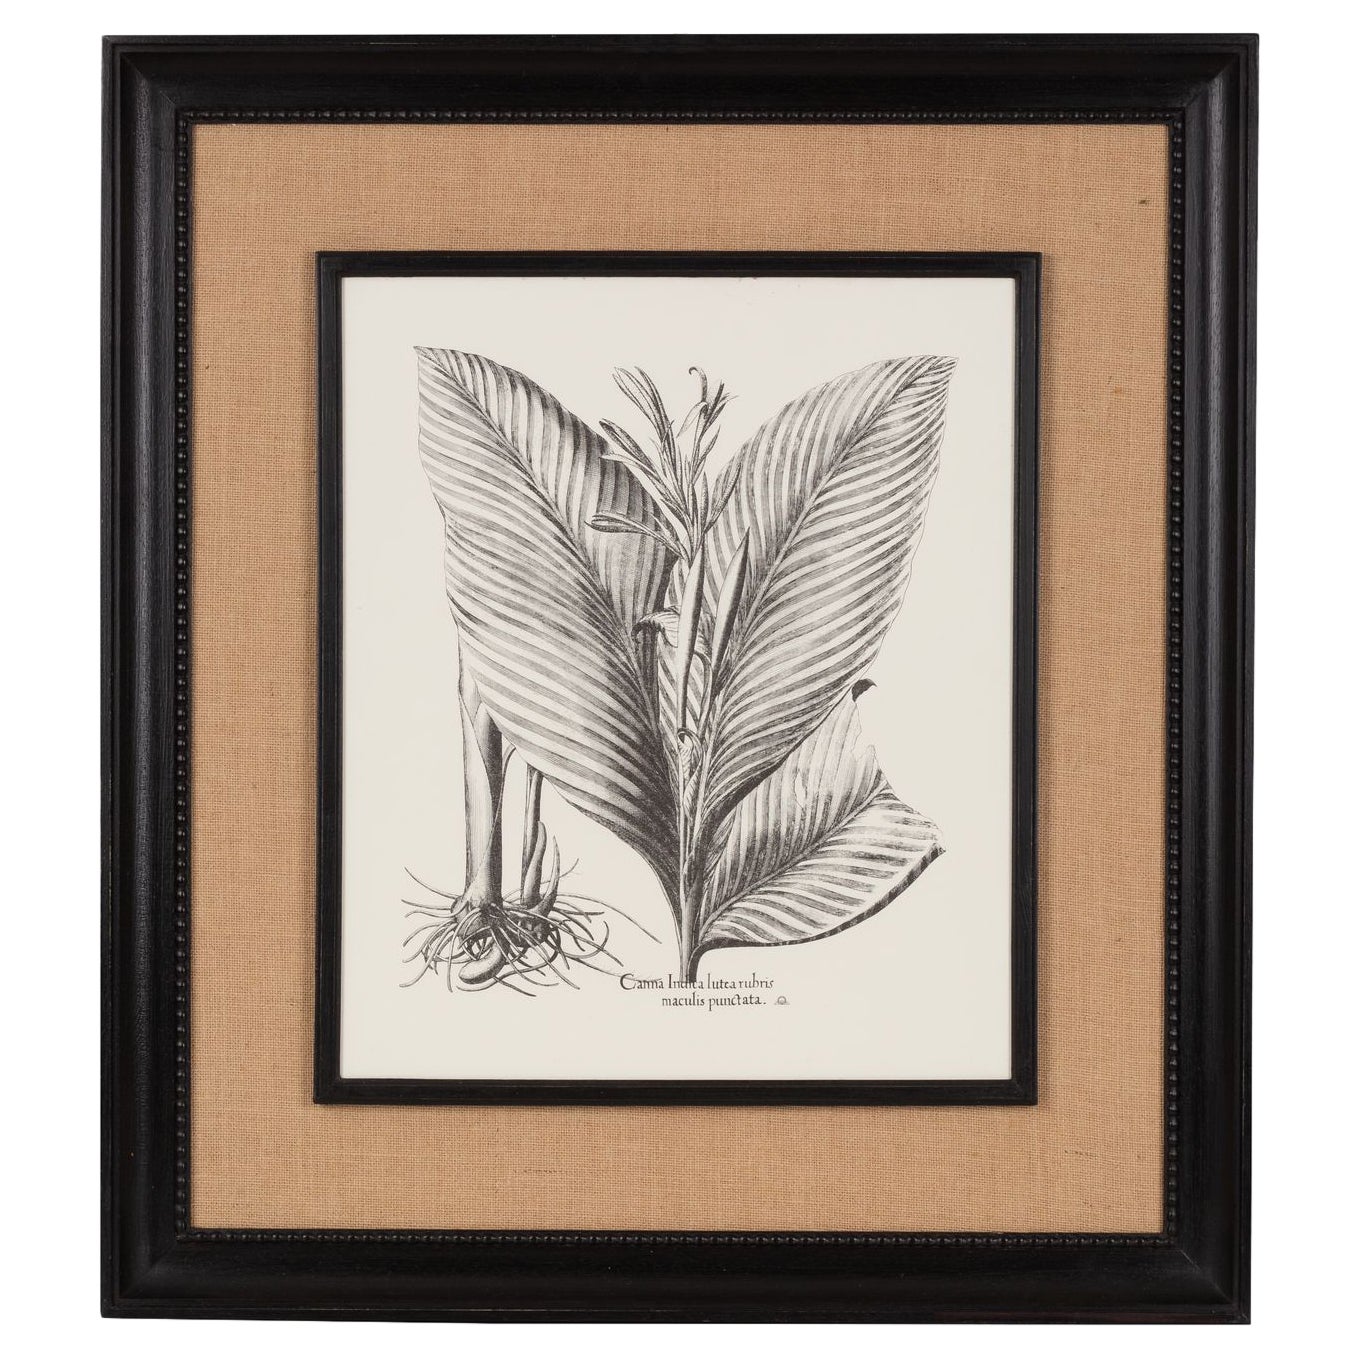 Italian Contemporary HandCrafted Print "Canna Indica" Wood and Jute Frame 2 of 2